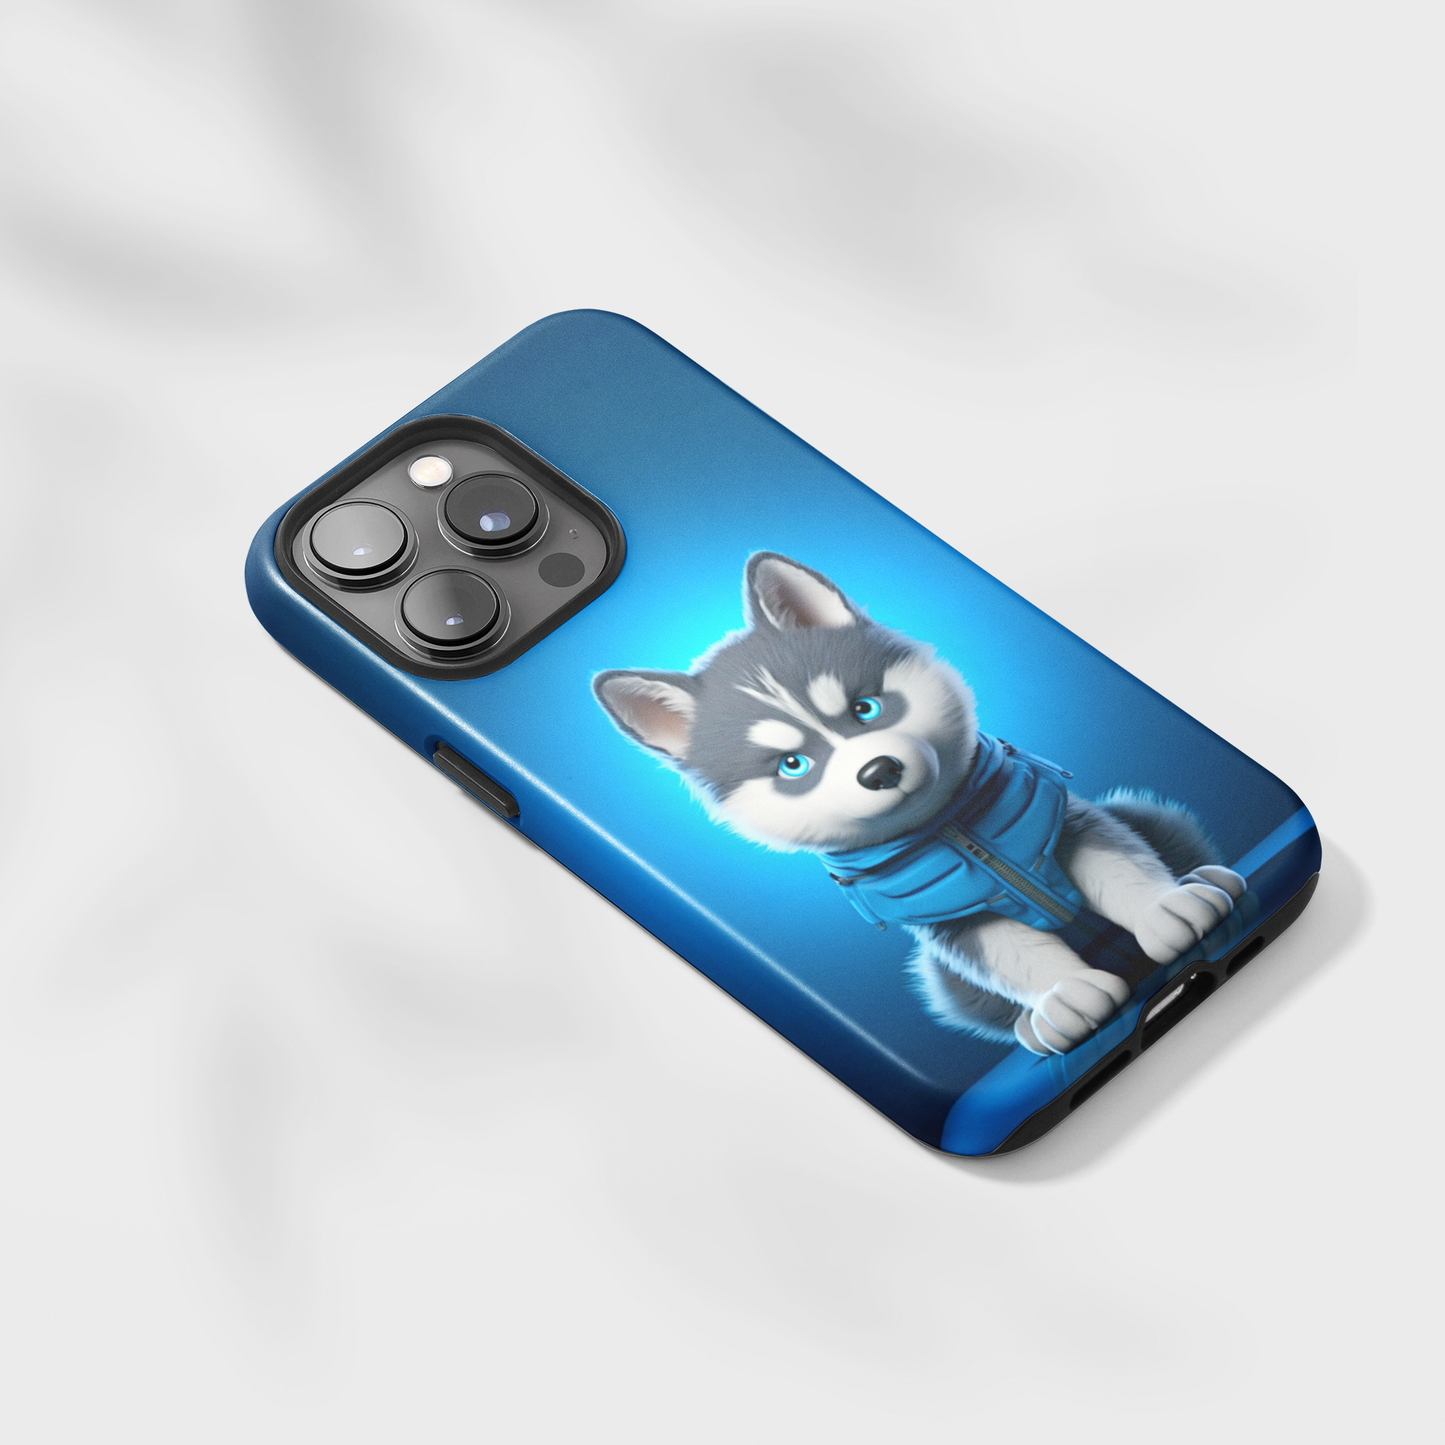 Blue Husky Charm (iPhone MagSafe Case)Blue Husky Charm MagSafe Durable Case: Style Meets Protection 📱✨
Upgrade your device with Rima Gallery's Blue Husky Charm MagSafe Durable Case. This case isn’t justRimaGallery